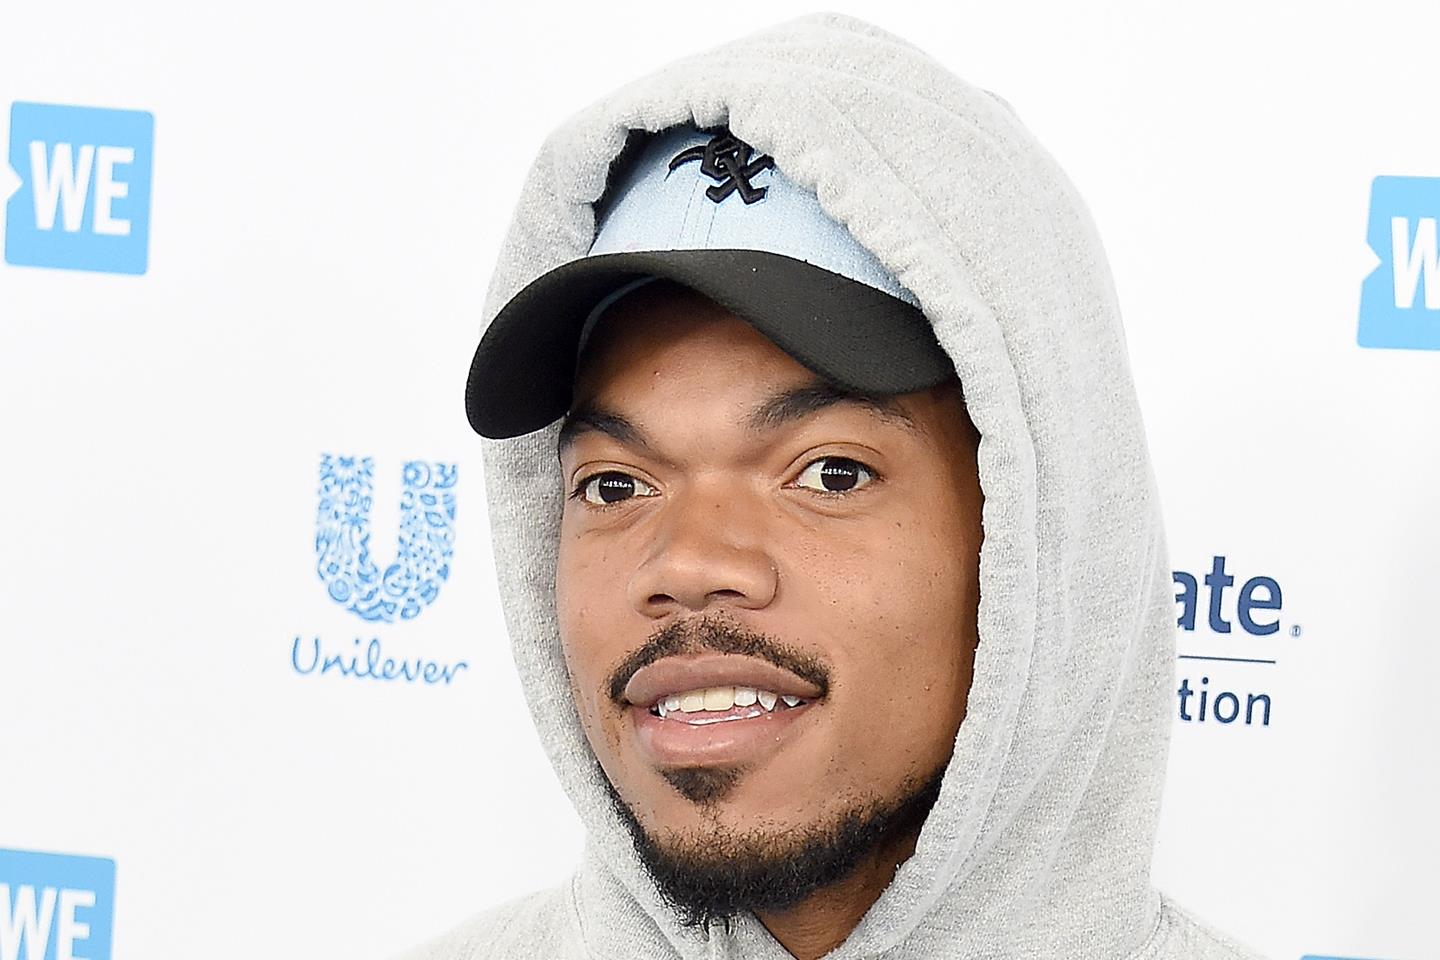 Chance The Rapper Tickets Chance The Rapper Tour and Concert Tickets